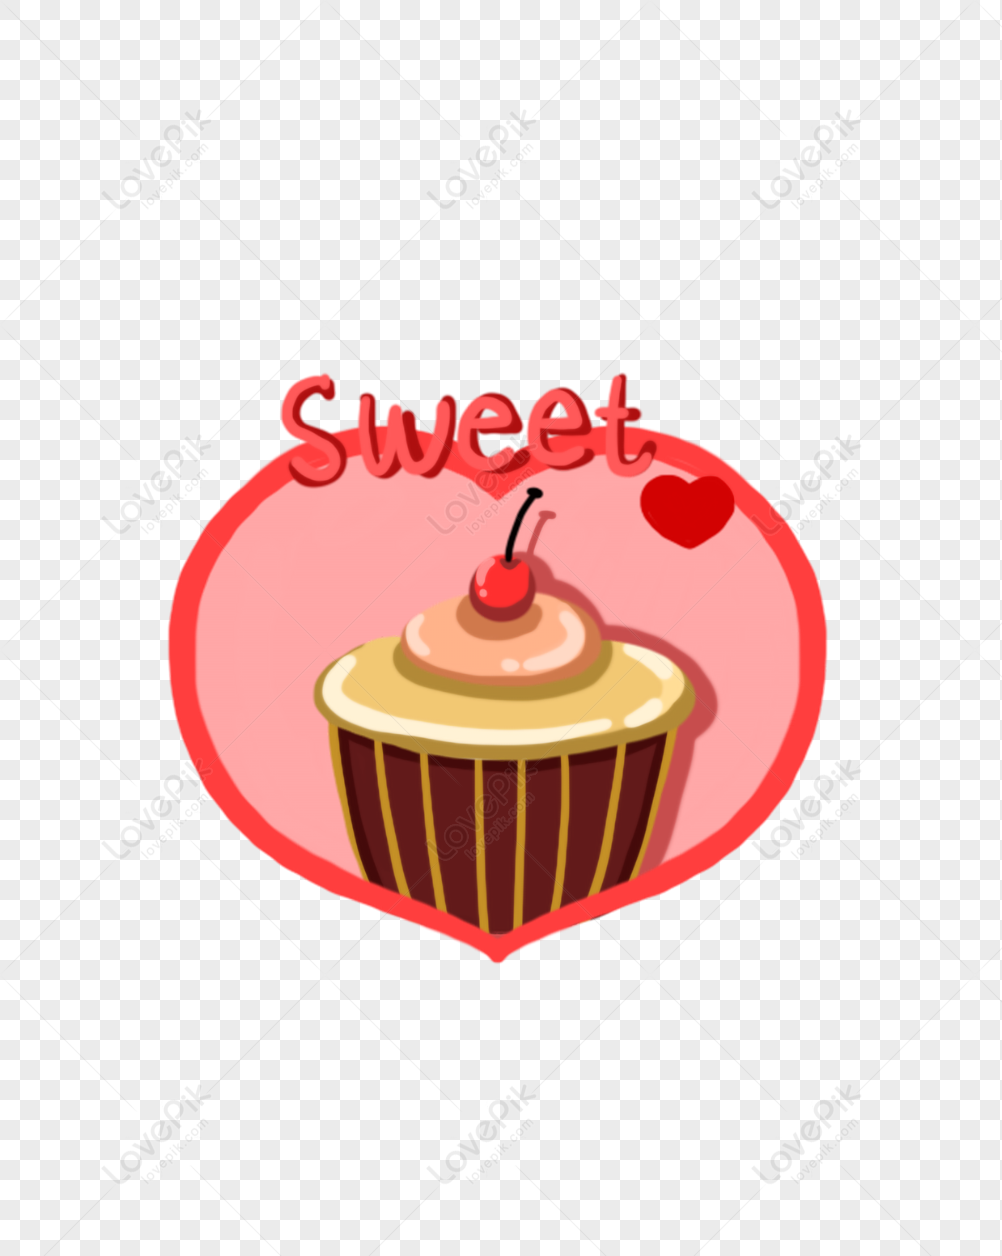 Cartoon Hand Drawn Love Sweet Cake PNG White Transparent And Clipart Image  For Free Download - Lovepik | 401194352